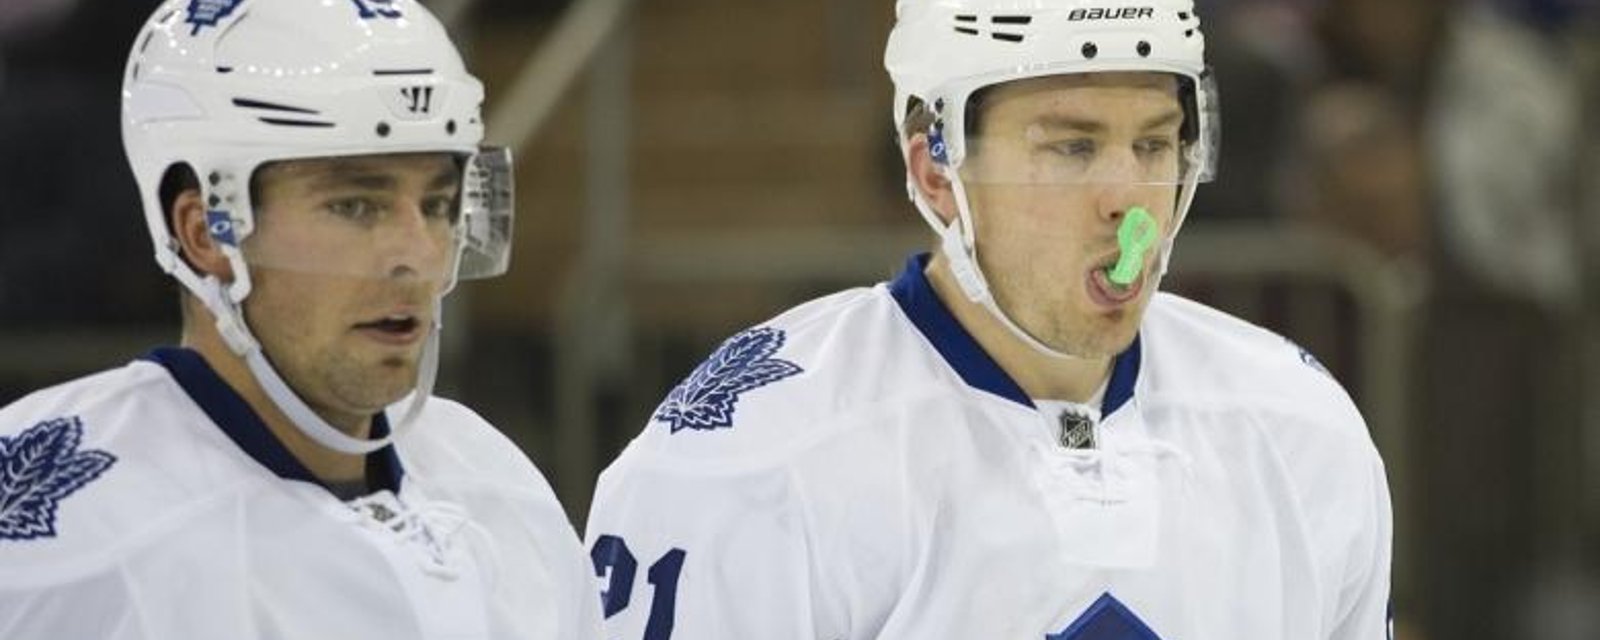 Breaking: Leafs confirm not just one but two players are done for the season.